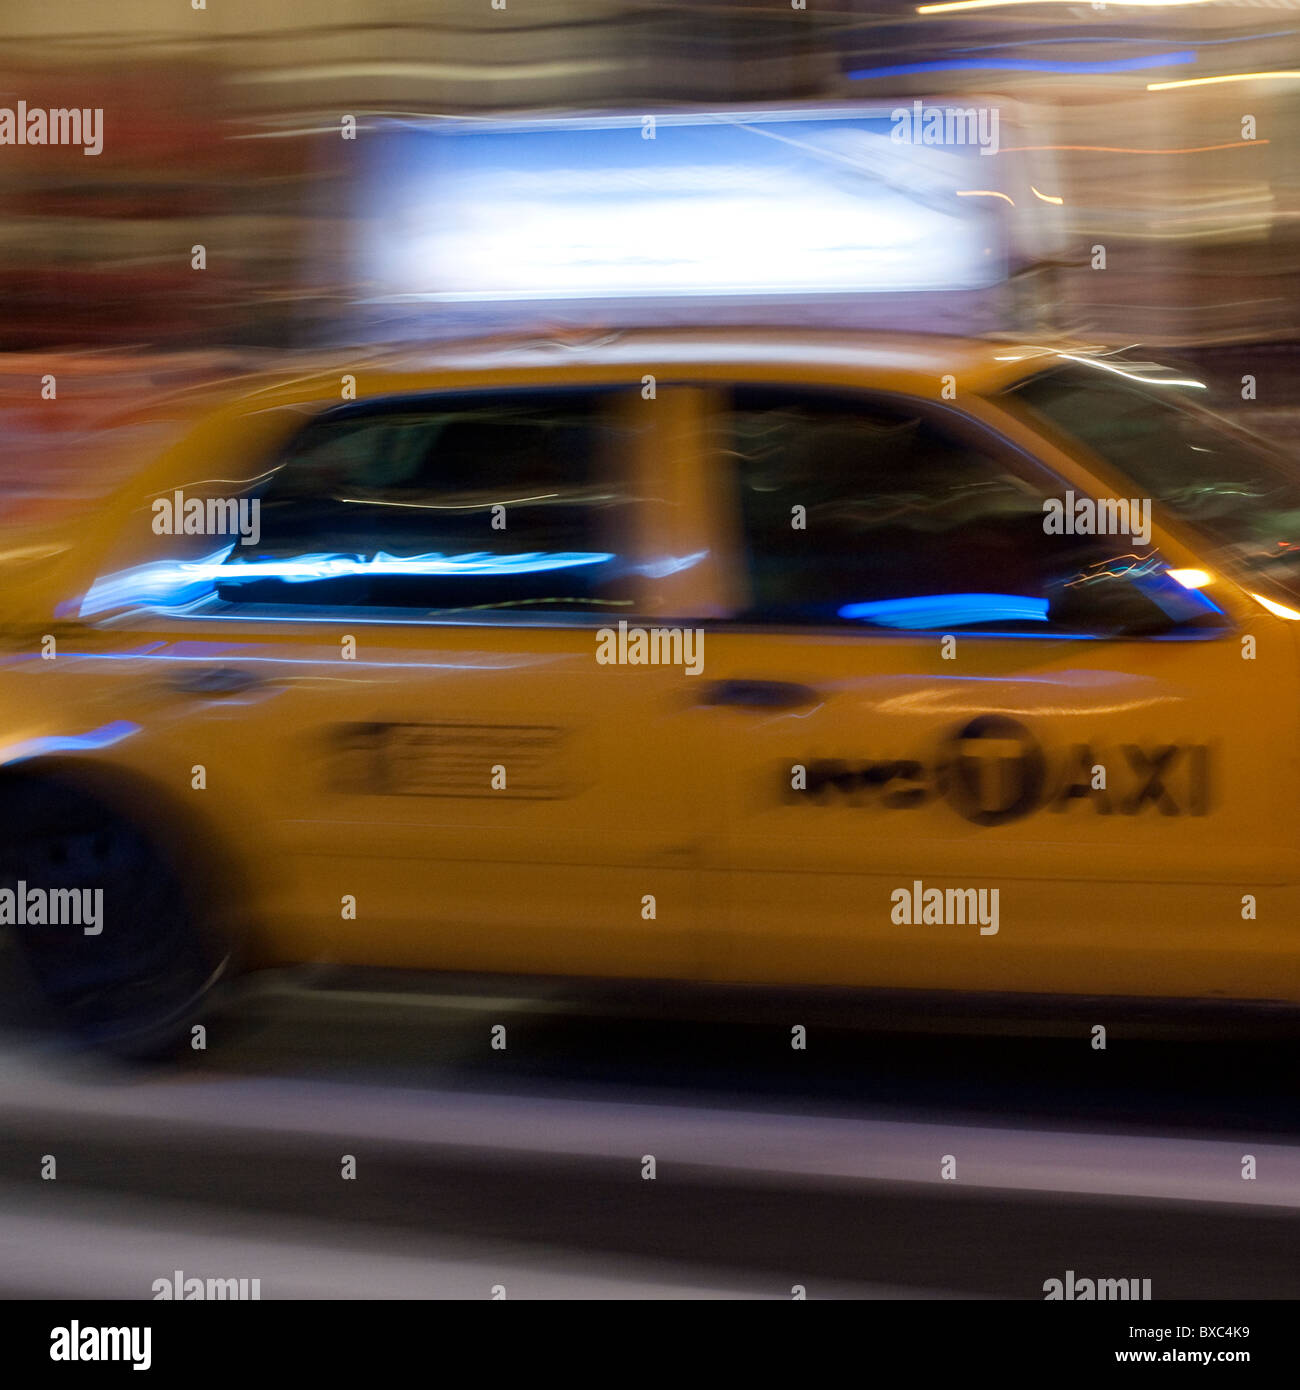 Blurred image of a yellow taxi in Manhattan, New York City, U.S.A. Stock Photo